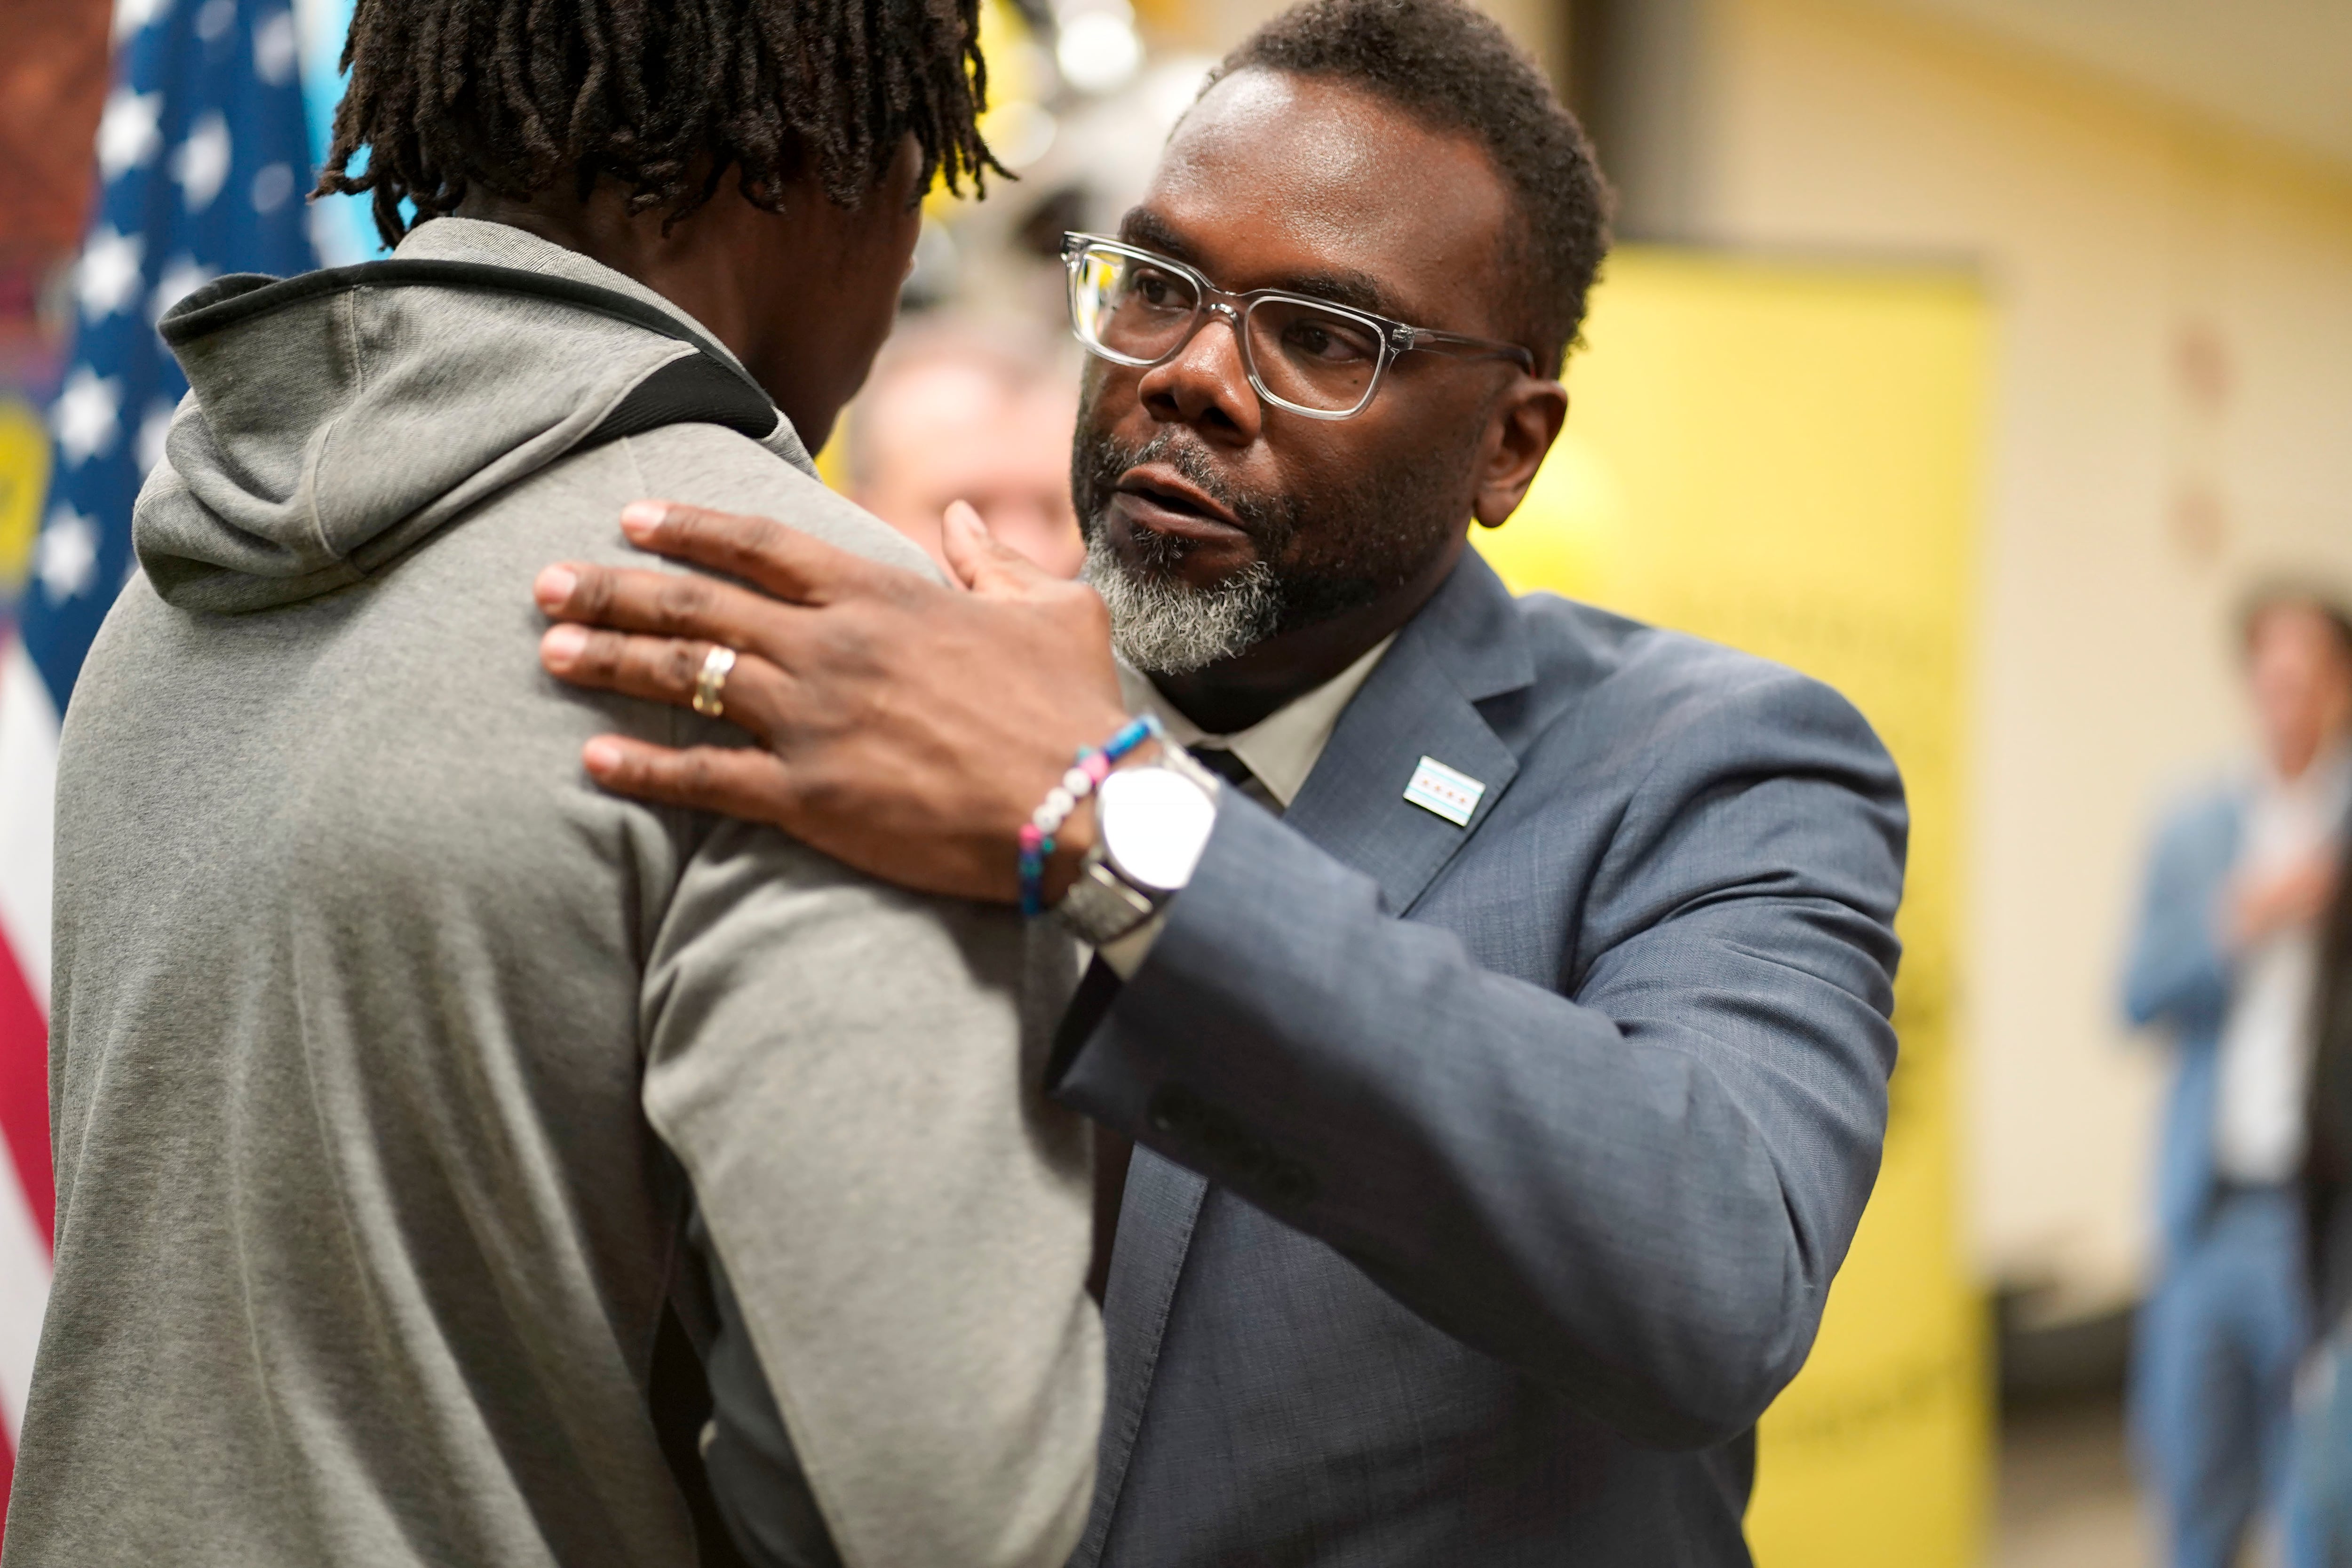 Chicago Mayor Brandon Johnson, wearing glasses and a gray suit jacket, hugs a teen in a gray sweat jacket. There’s an American flag and one perso in the background.